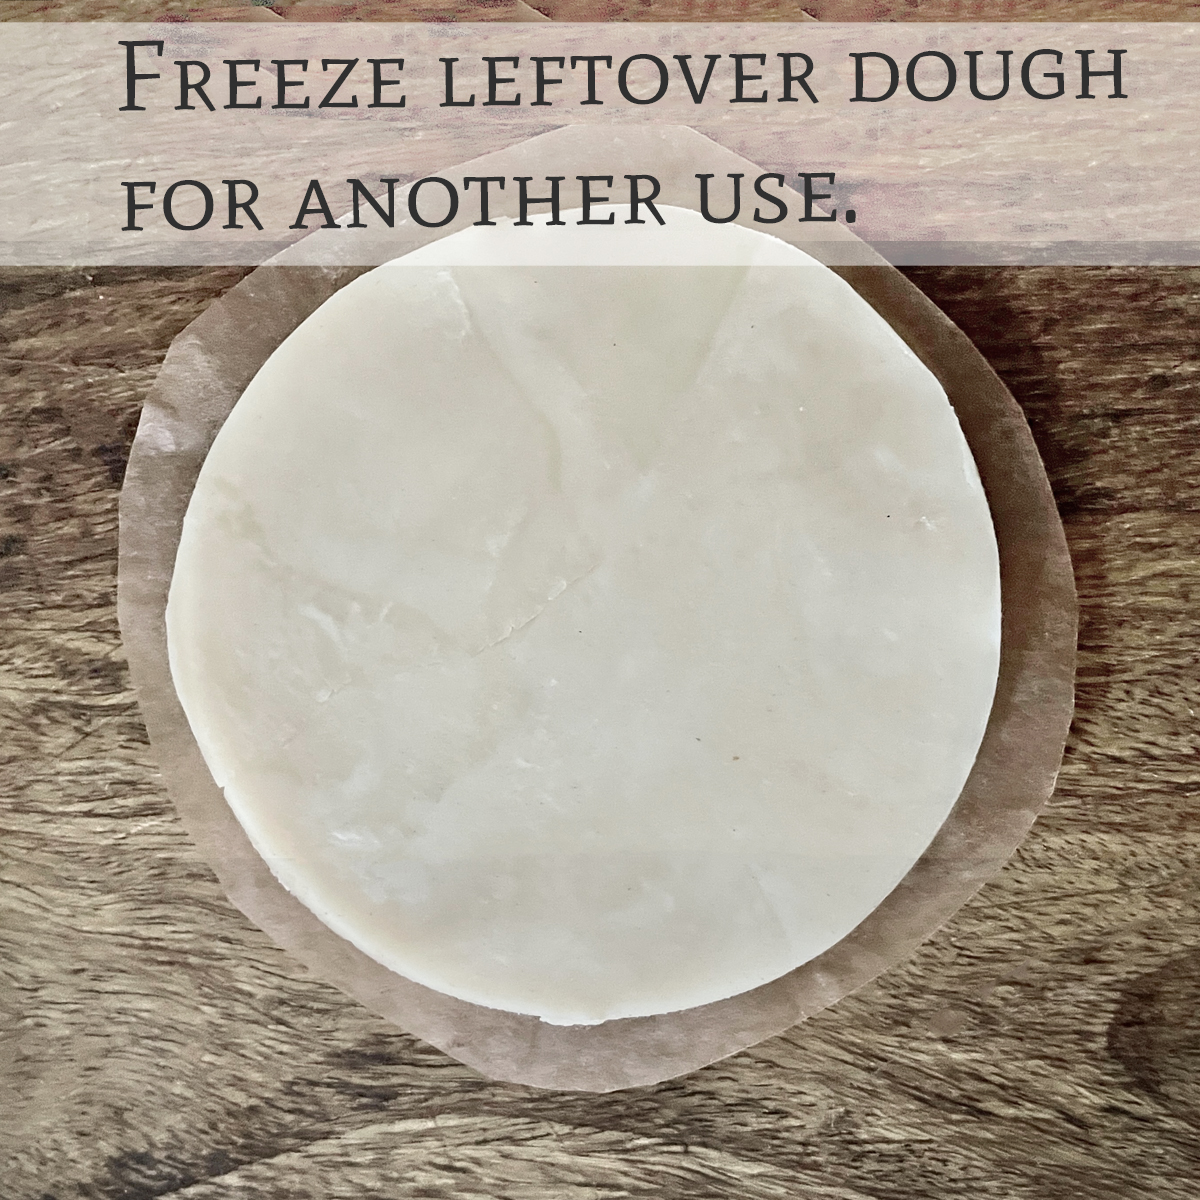 Round disk of uncooked pie crust ready to freeze.